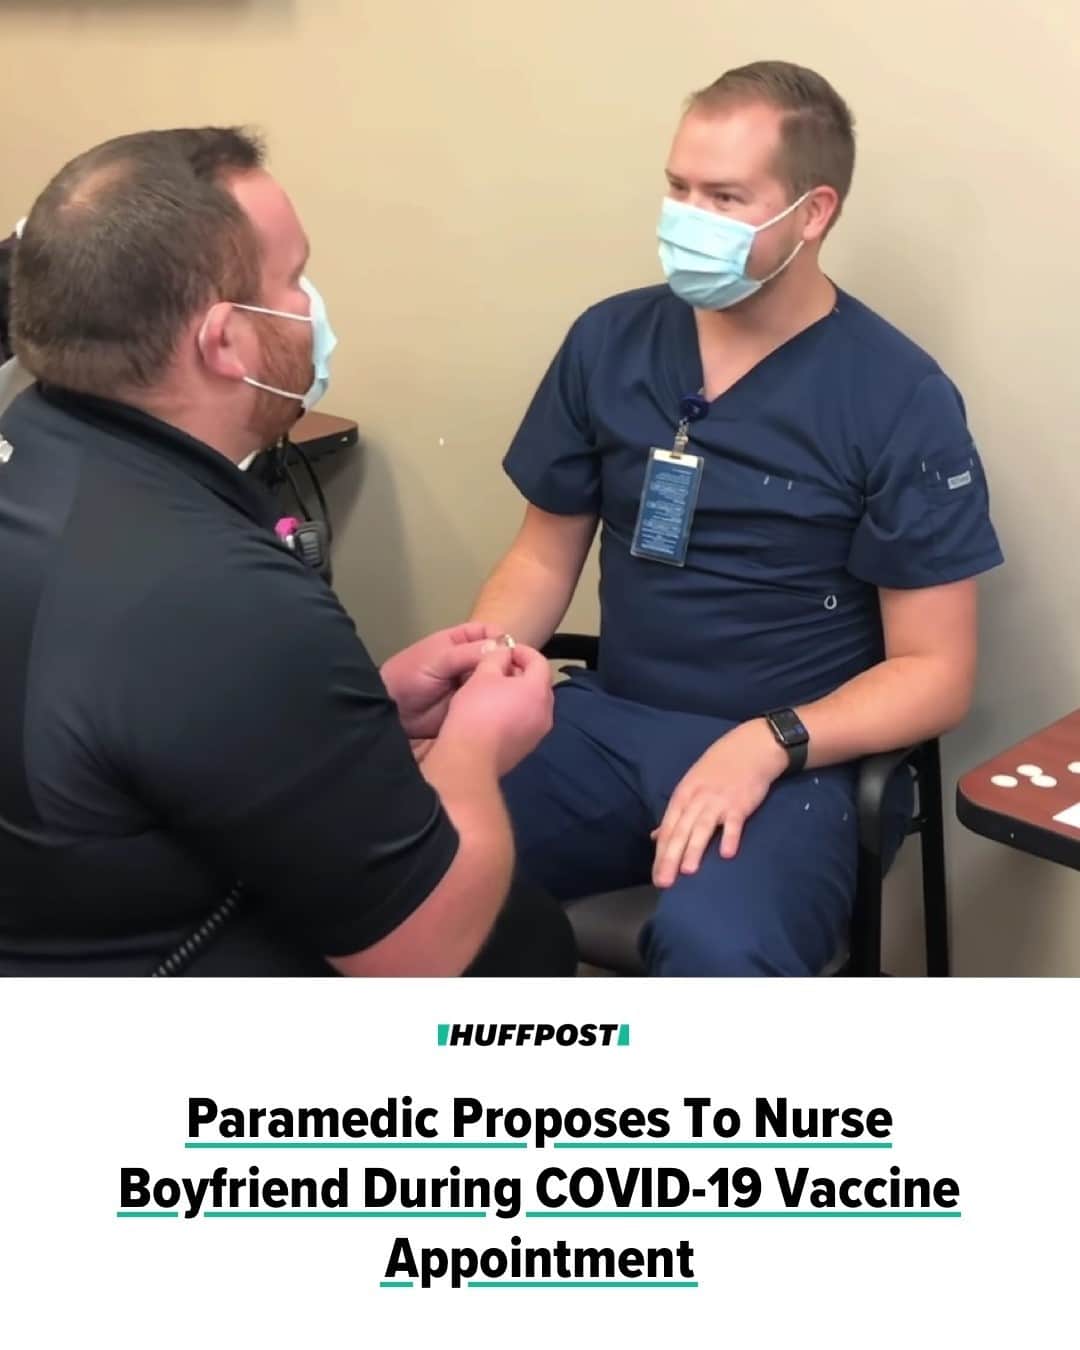 Huffington Postさんのインスタグラム写真 - (Huffington PostInstagram)「Two South Dakota health care workers began 2021 as fiancés and internet stars after footage of their pandemic era engagement went viral. ⁠ ⁠ A paramedic and EMS supervisor, Robbie Vargas-Cortes made an appointment at the Sanford Canton-Inwood Medical Center last month to receive his first dose of a COVID-19 vaccine. His boyfriend of five years, Eric Vanderlee, is a registered nurse and one of the center’s vaccine administrators. ⁠ ⁠ To Vanderlee’s surprise, however, Vargas-Cortes arrived at the Dec. 23 appointment with an engagement ring taped to his arm. Though it took him a moment to realize what has happening when he rolled back Vargas-Cortes’s shirt sleeve, Vanderlee happily accepted the proposal as his colleagues applauded. ⁠ ⁠ “It was just an amazing moment after I figured it out,” Vanderlee told CNN, noting that he still had to administer the vaccine to his fiancé after the big gesture. ⁠ ⁠ The Sanford Canton-Inwood Medical Center uploaded a short video of the proposal to its Facebook page last week. As of Monday afternoon, the clip had received more than 8,000 likes and garnered gushing responses from viewers. ⁠ ⁠ “Best proposal of the year, hands down,” one person wrote. Added another, “If you like it you should put a ring and vaccine on it! Congrats!! This is good news!”⁠ ⁠ Speaking to The New York Times, Vanderlee said he volunteered to help distribute the vaccine in December, just weeks after his 86-year old grandfather, Norman, died of COVID-19. “I want to be a part of this end,” he said. “I feel like I can’t pass this up. It’s like a once-in-a-lifetime opportunity to be the one giving the vaccine if I have the chance.”⁠ ⁠ See the video at our link in bio! // 📷 Sanford Health/Facebook」1月5日 11時03分 - huffpost